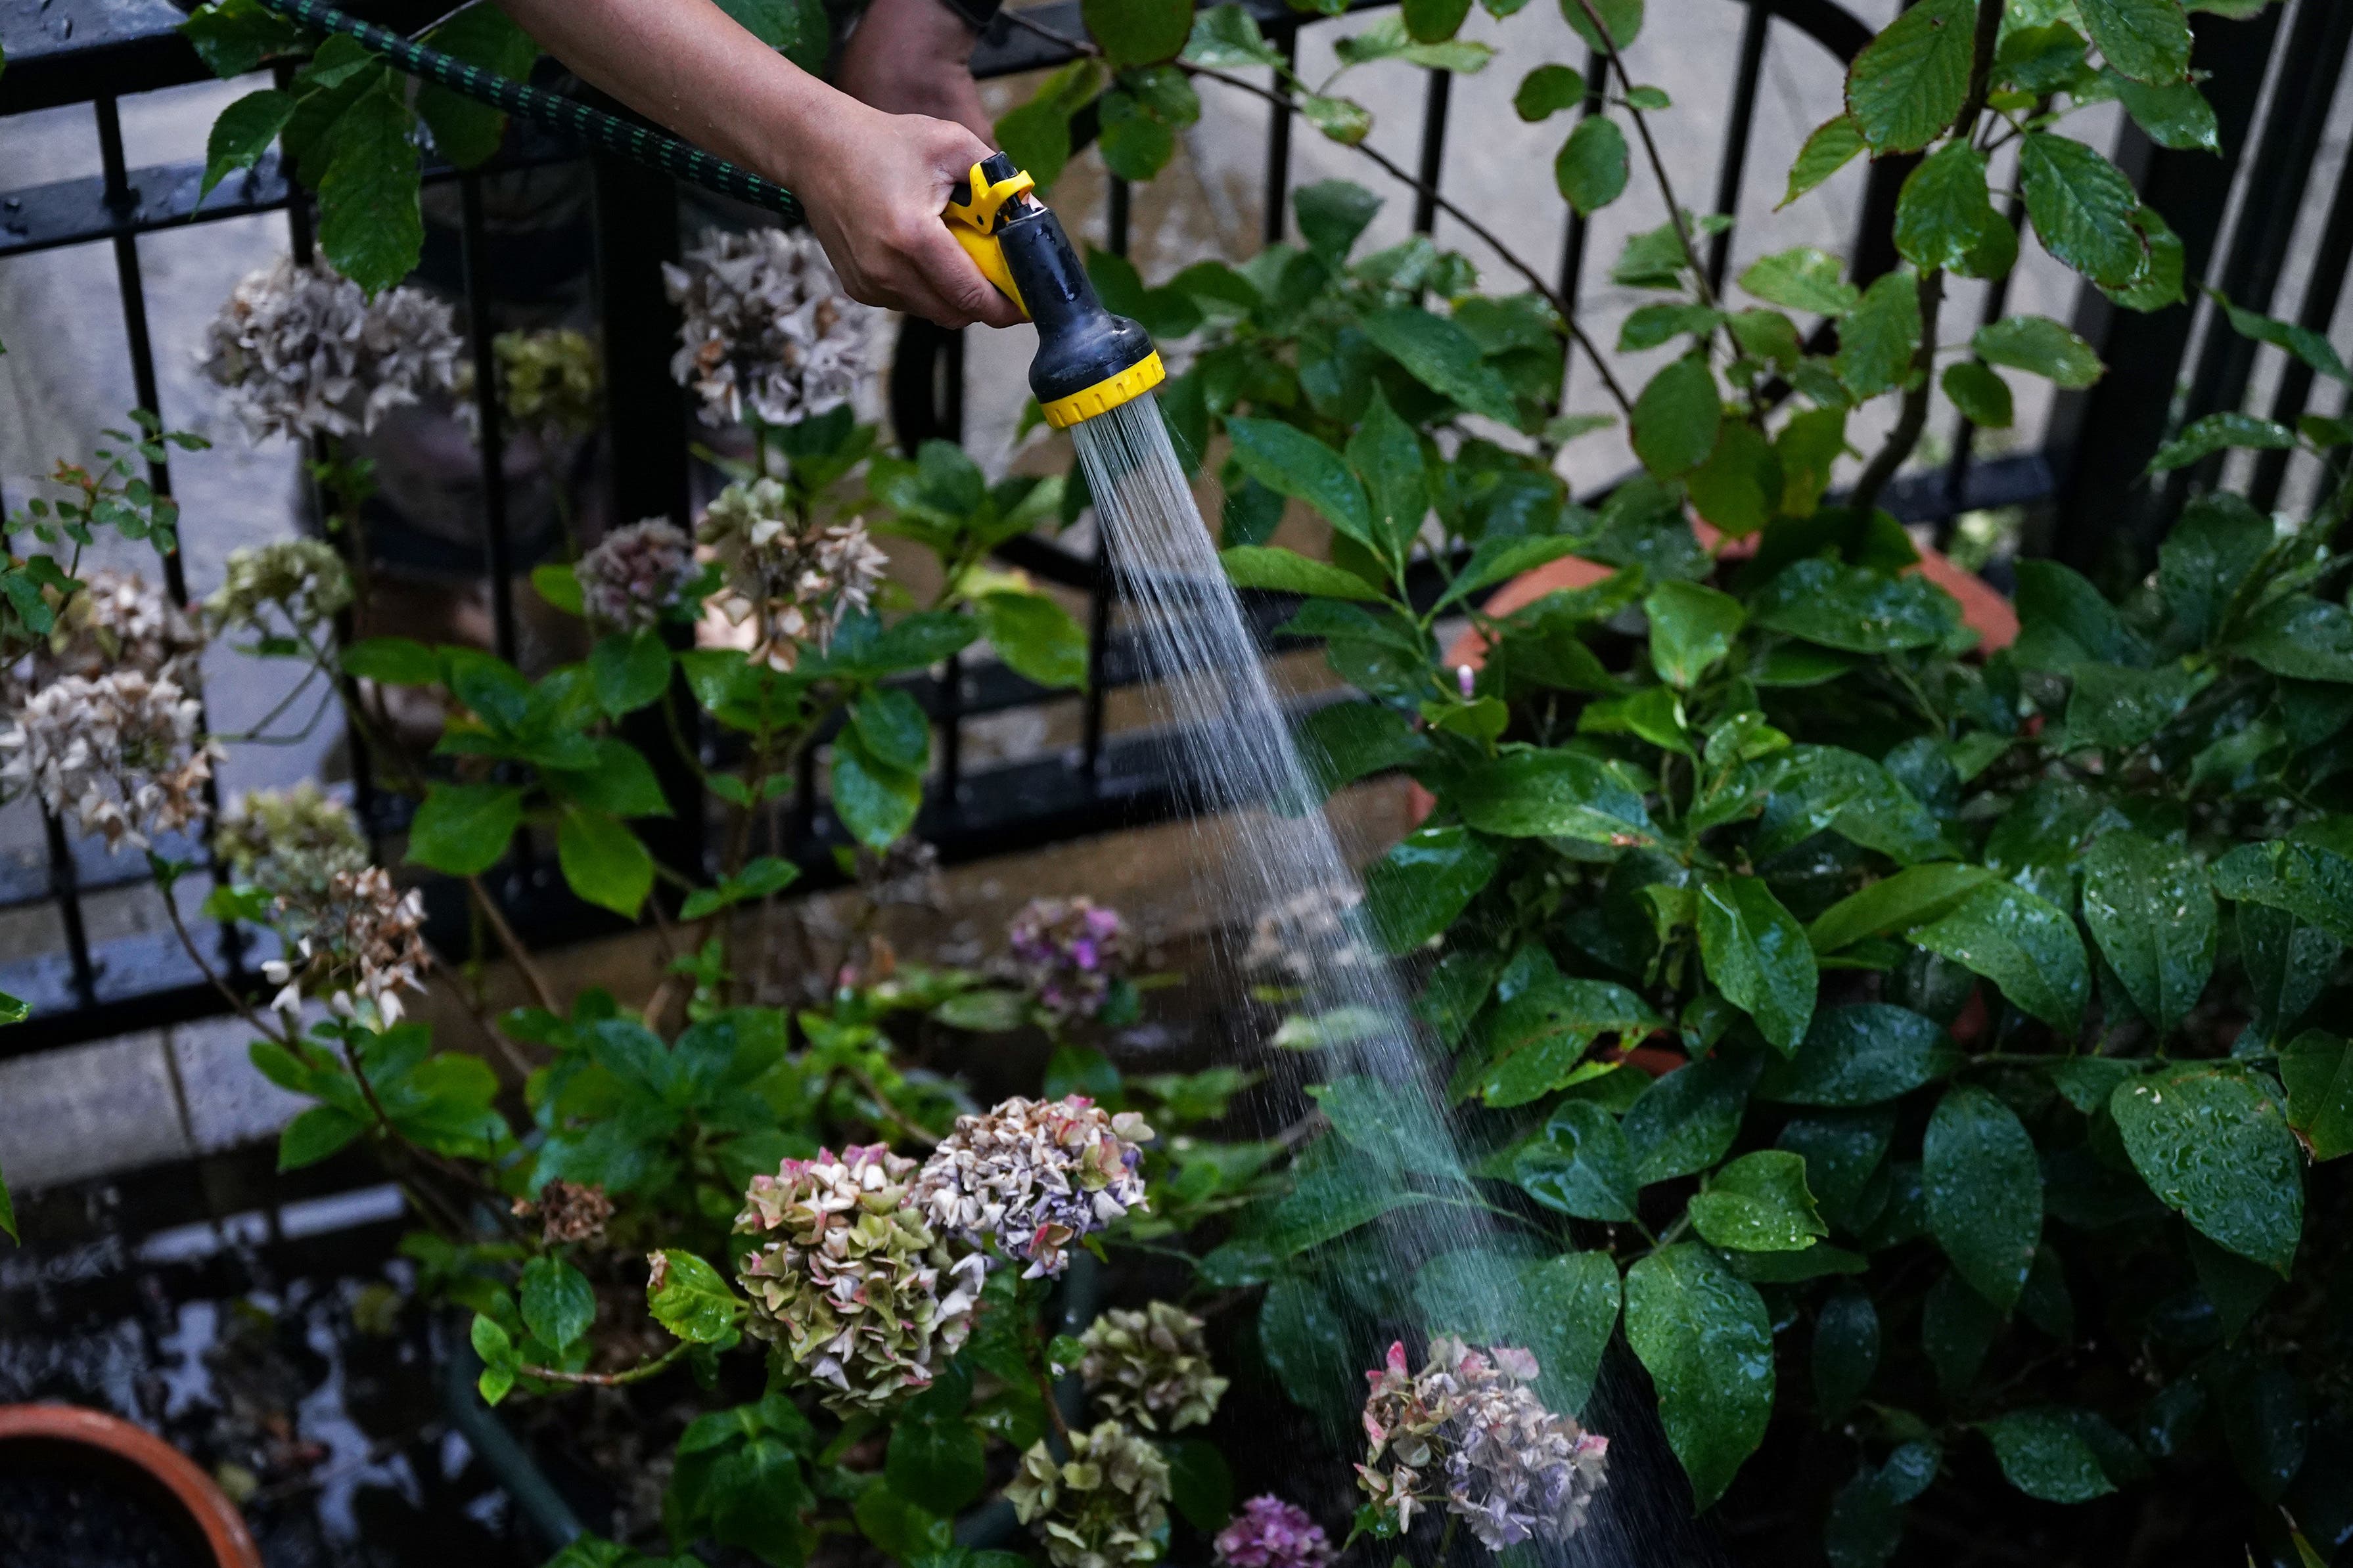 Thames Water is lifting the hosepipe ban it imposed in the summer (Yui Mok/PA)